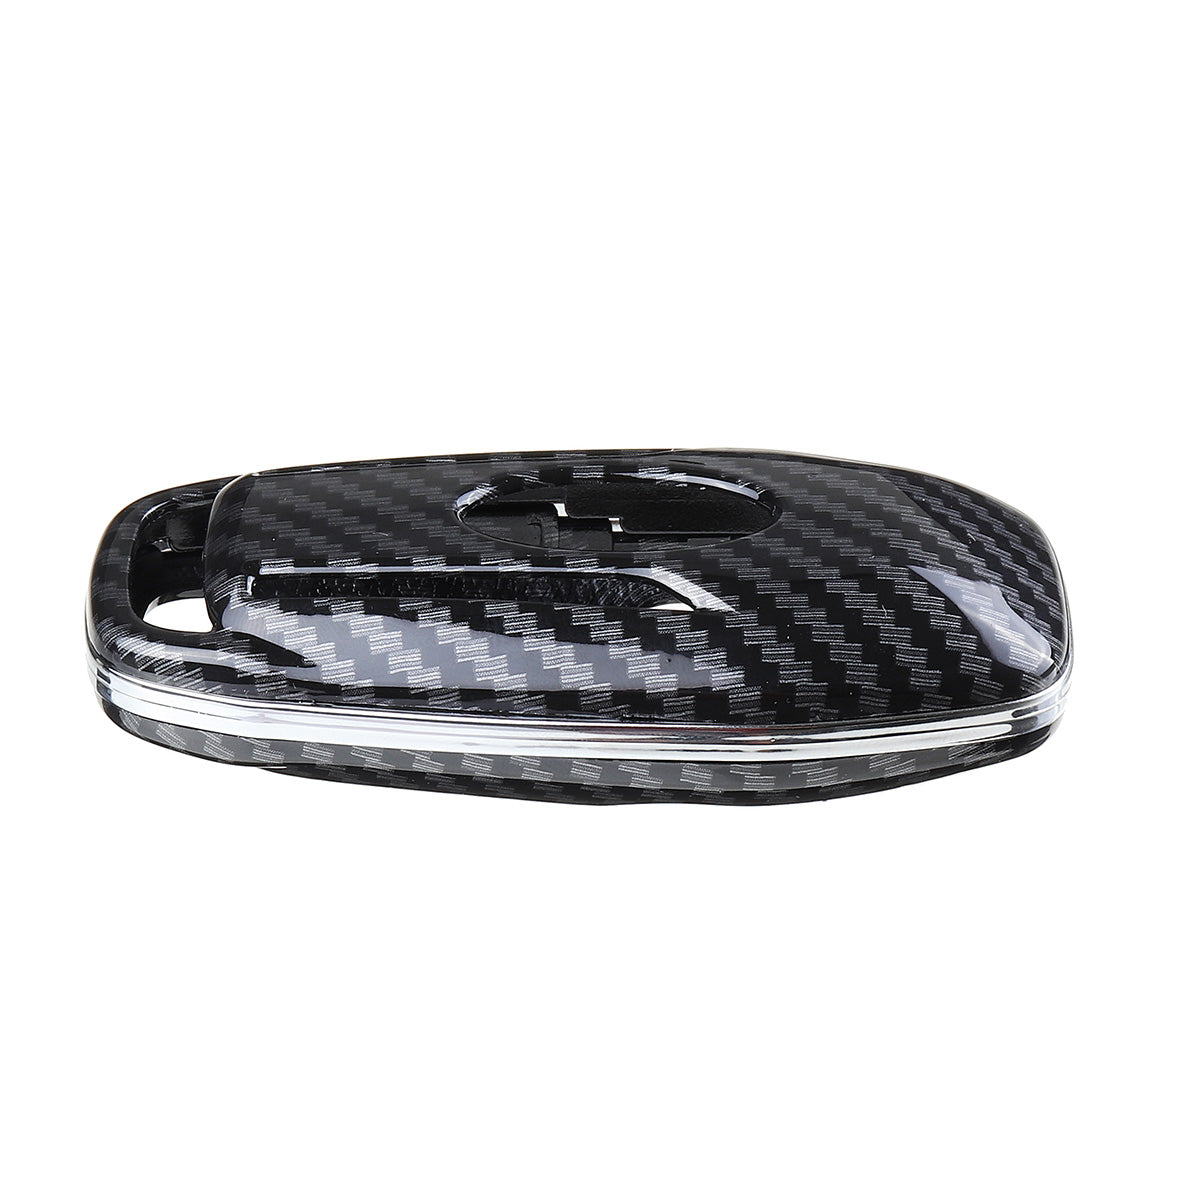 Carbon Fiber Hard Smart Key Cover For Ford Lincoln Accessories keychain Case Holder - Auto GoShop